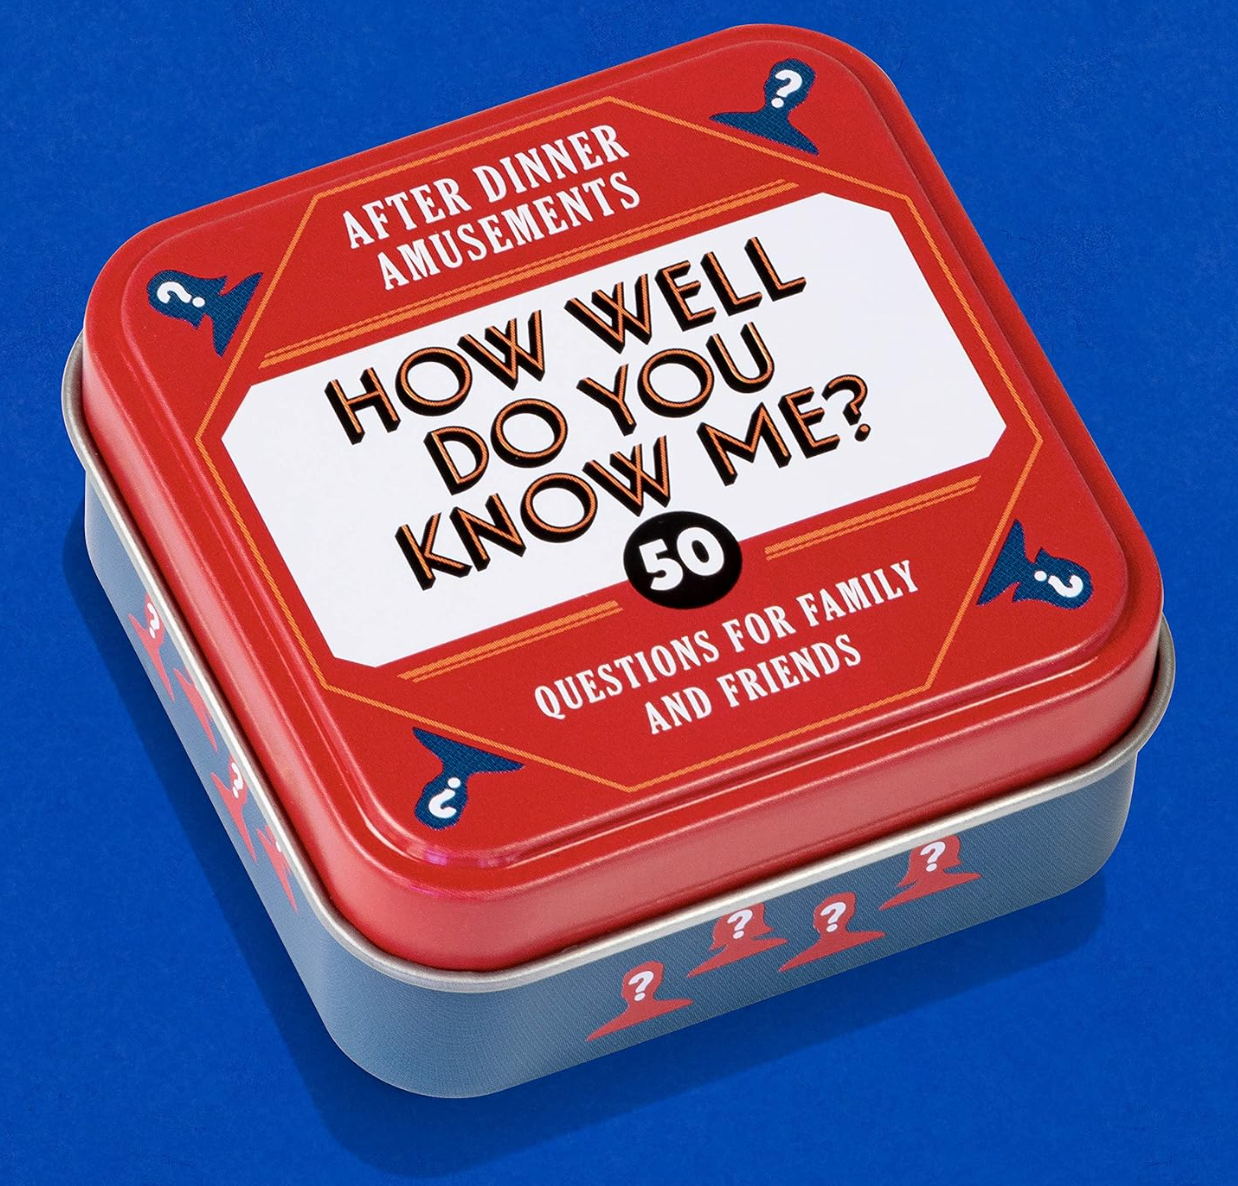 After Dinner Amusements: How Well Do You Know Me?: 50 Questions for Family and Friends - 51 cards